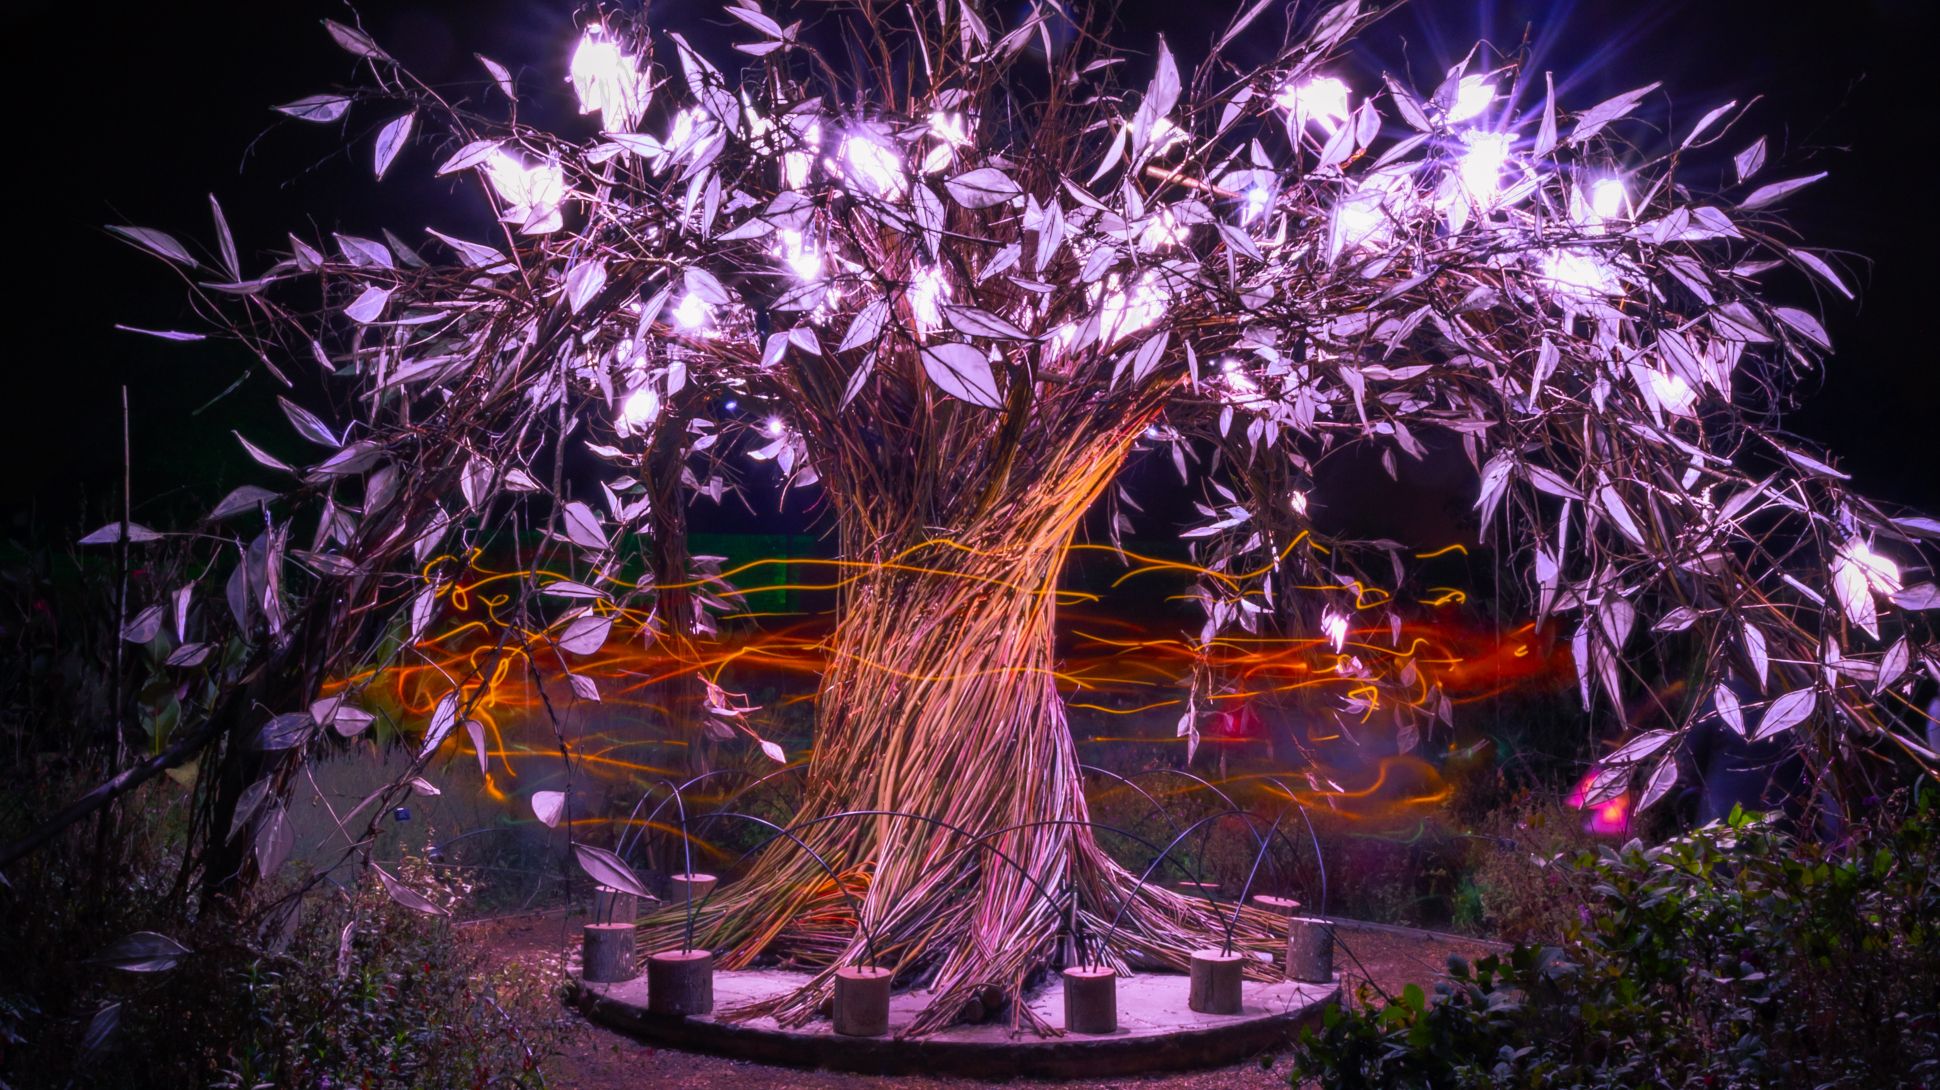 A sculpture of a tree with illuminated purple leaves